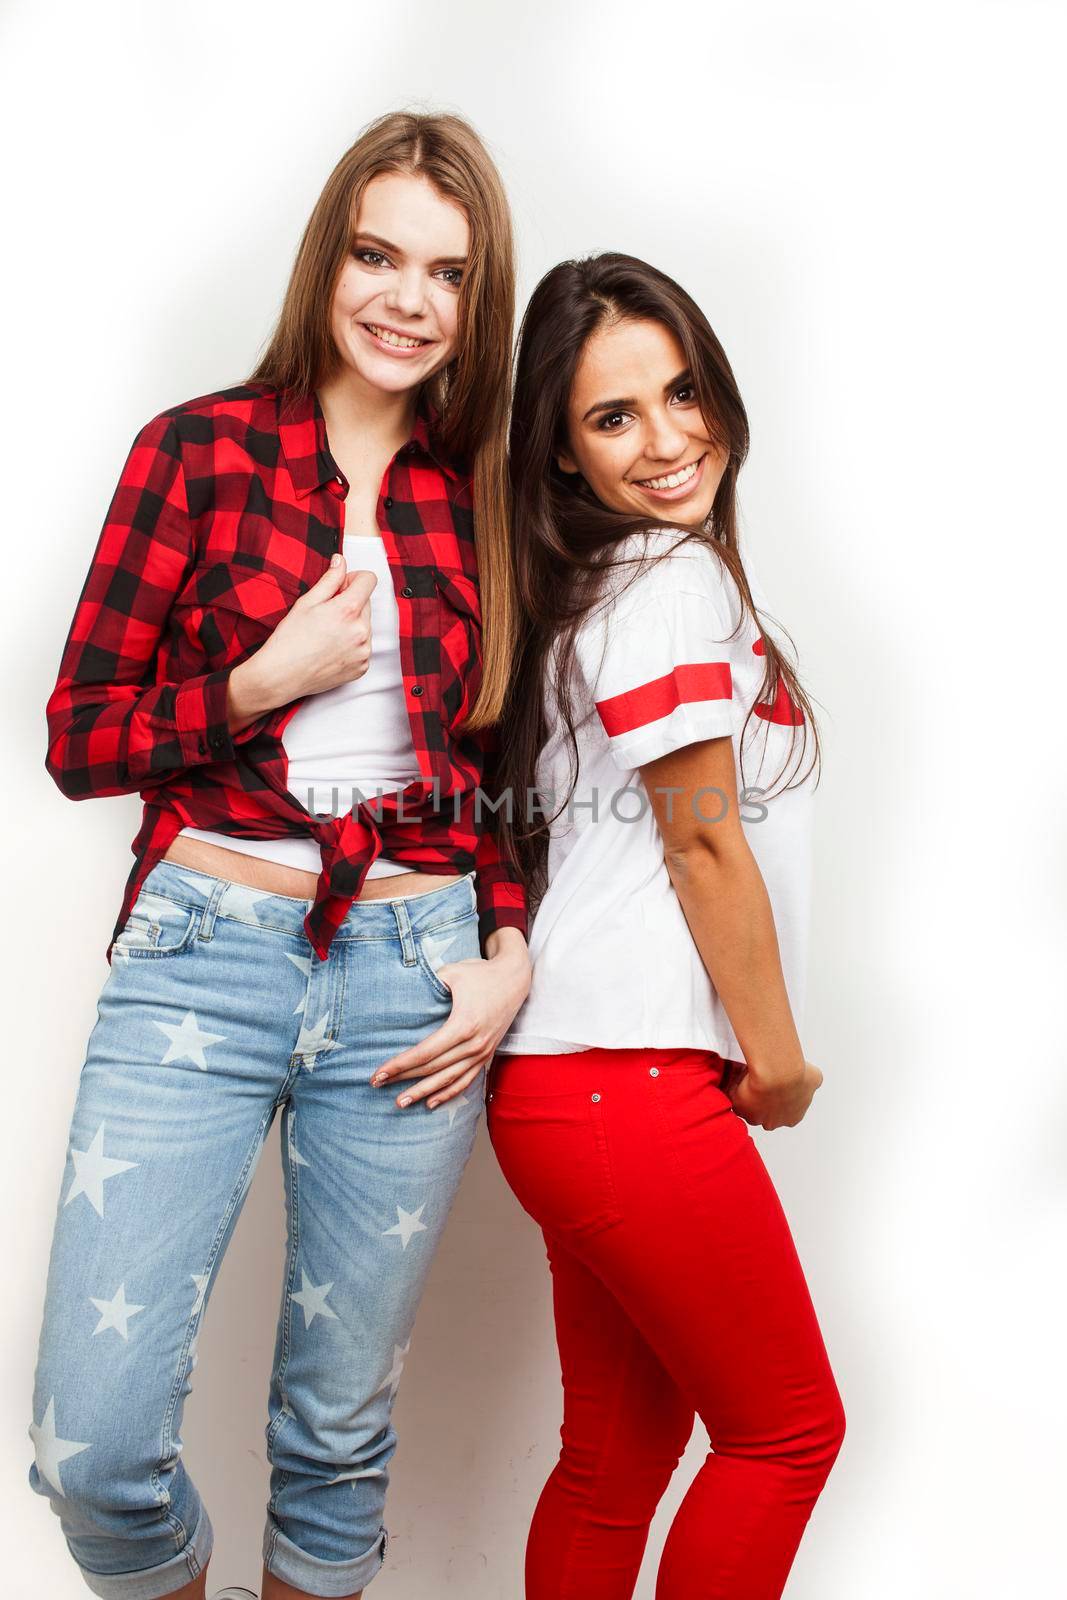 best friends teenage girls together having fun, posing emotional on white background, besties happy smiling, lifestyle people concept, blond and brunette multi nations by JordanJ